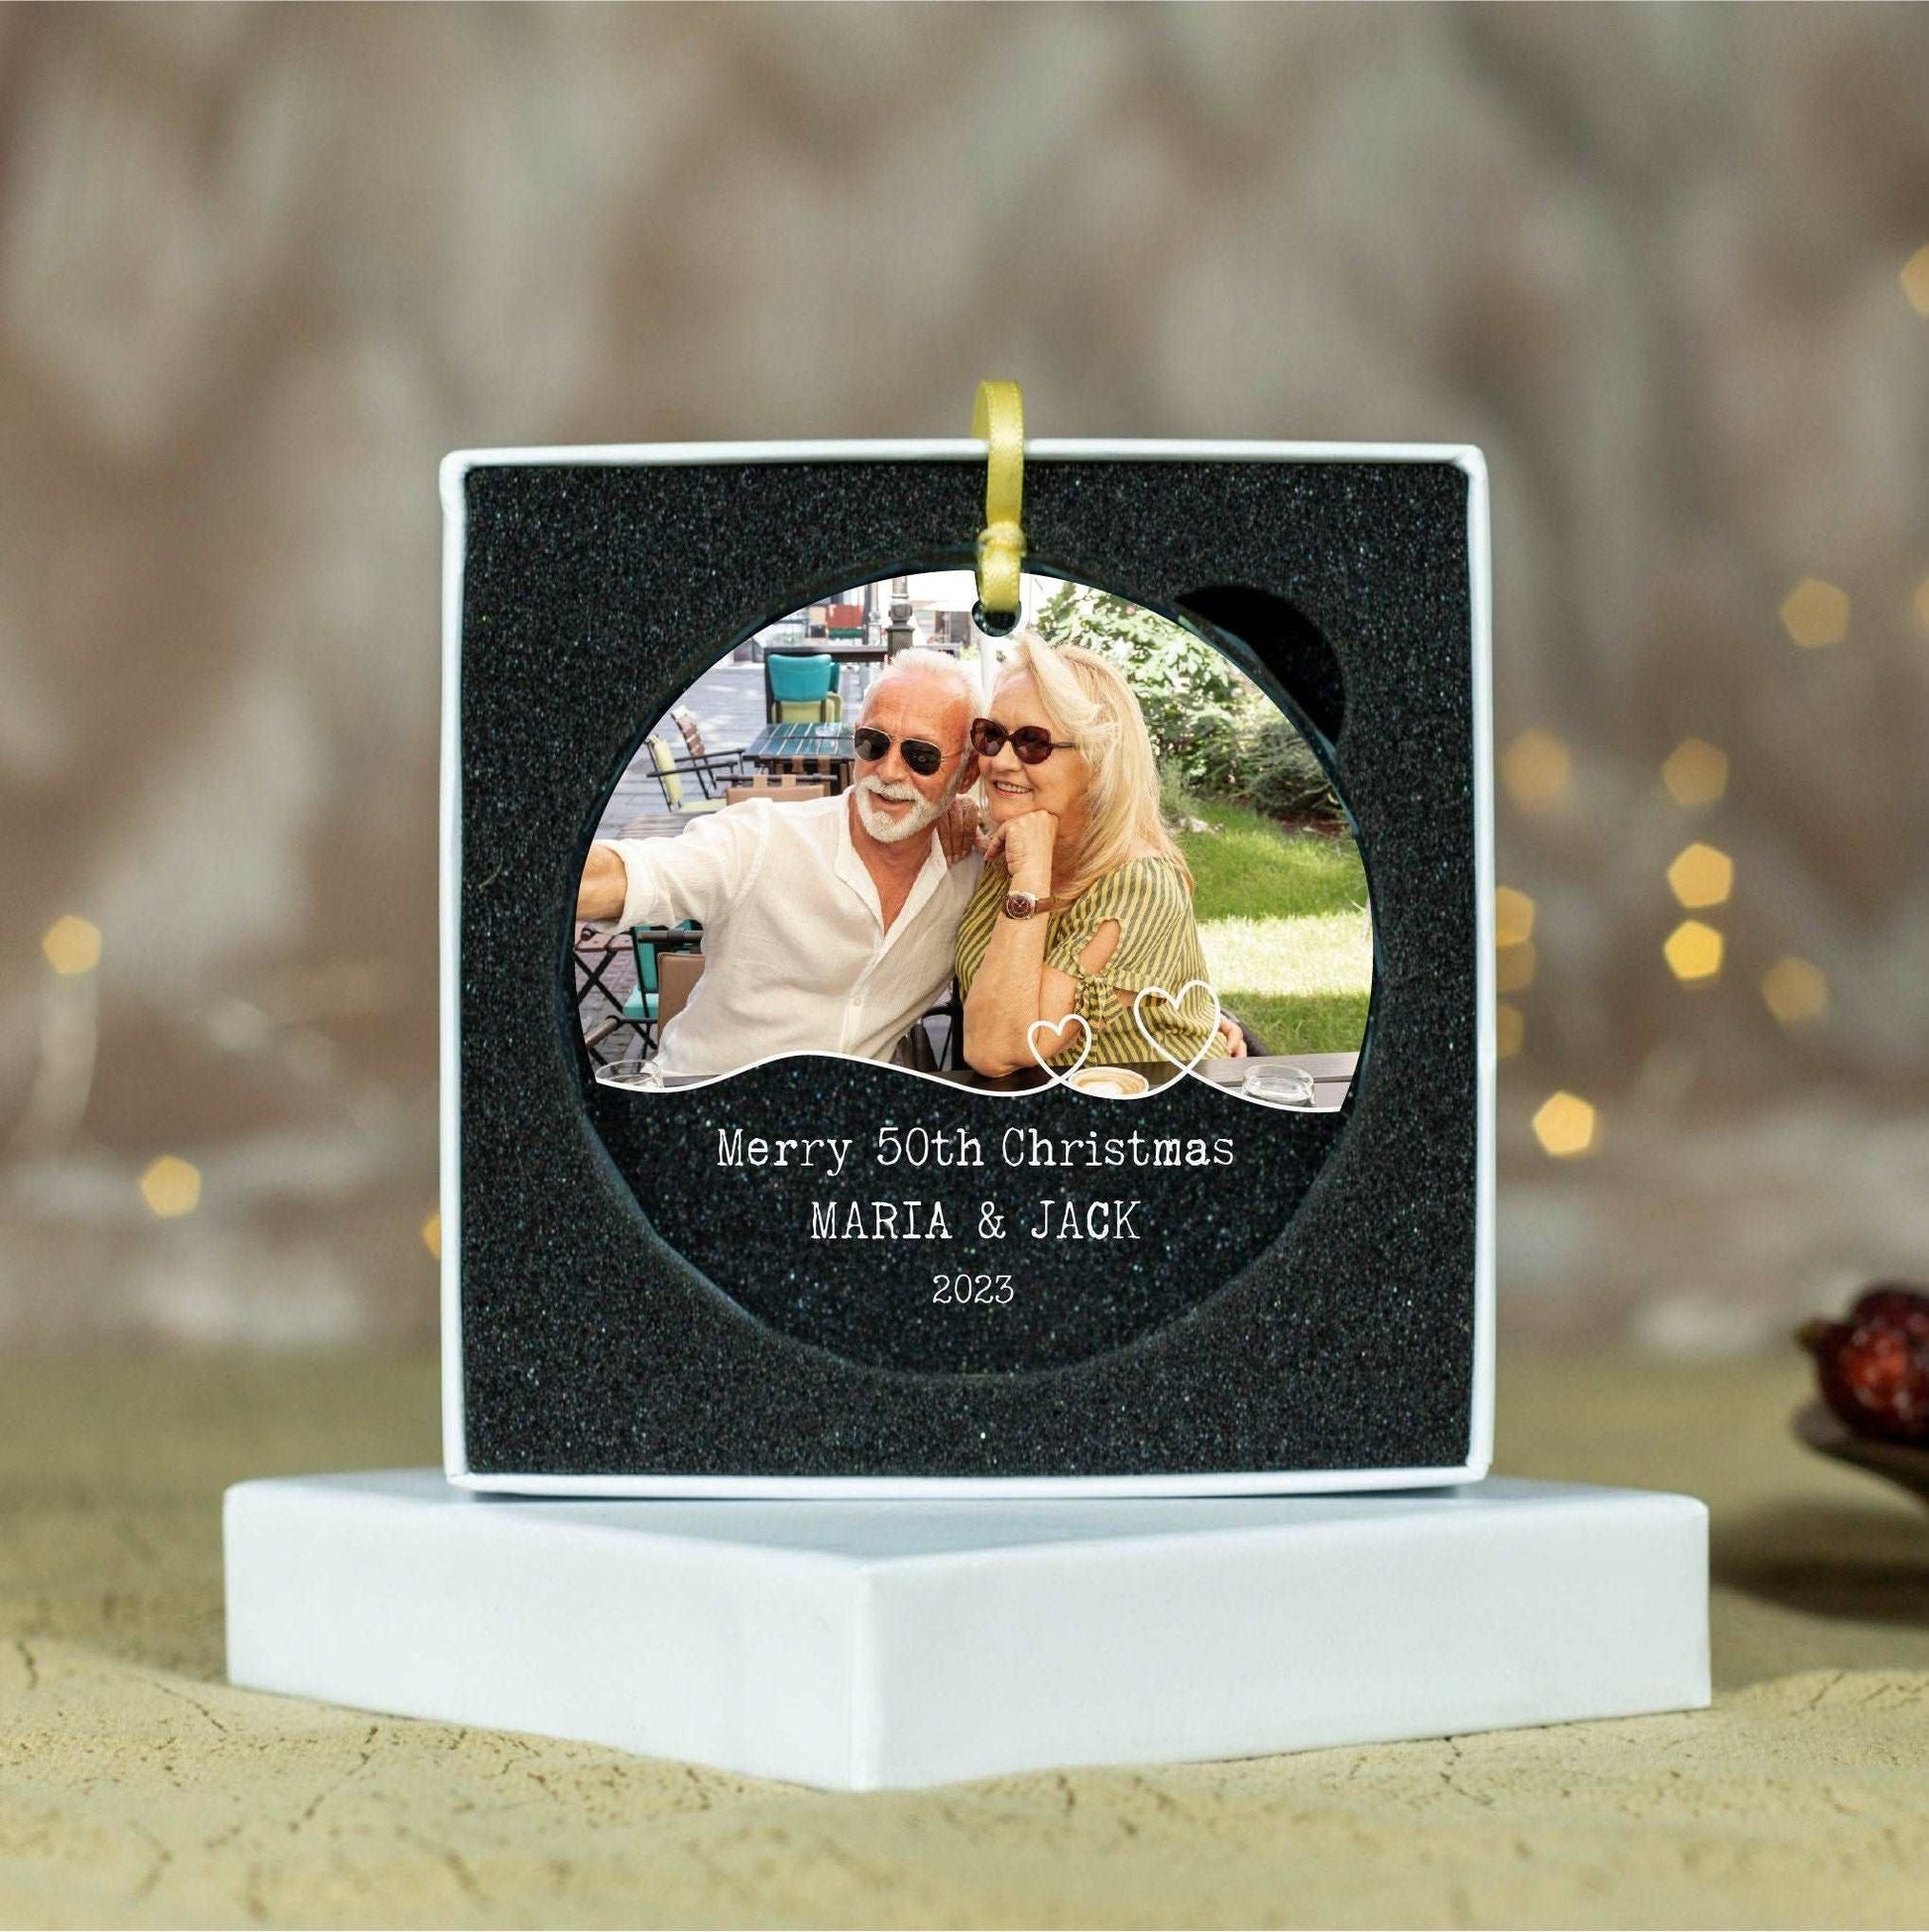 a picture of a couple on a christmas ornament